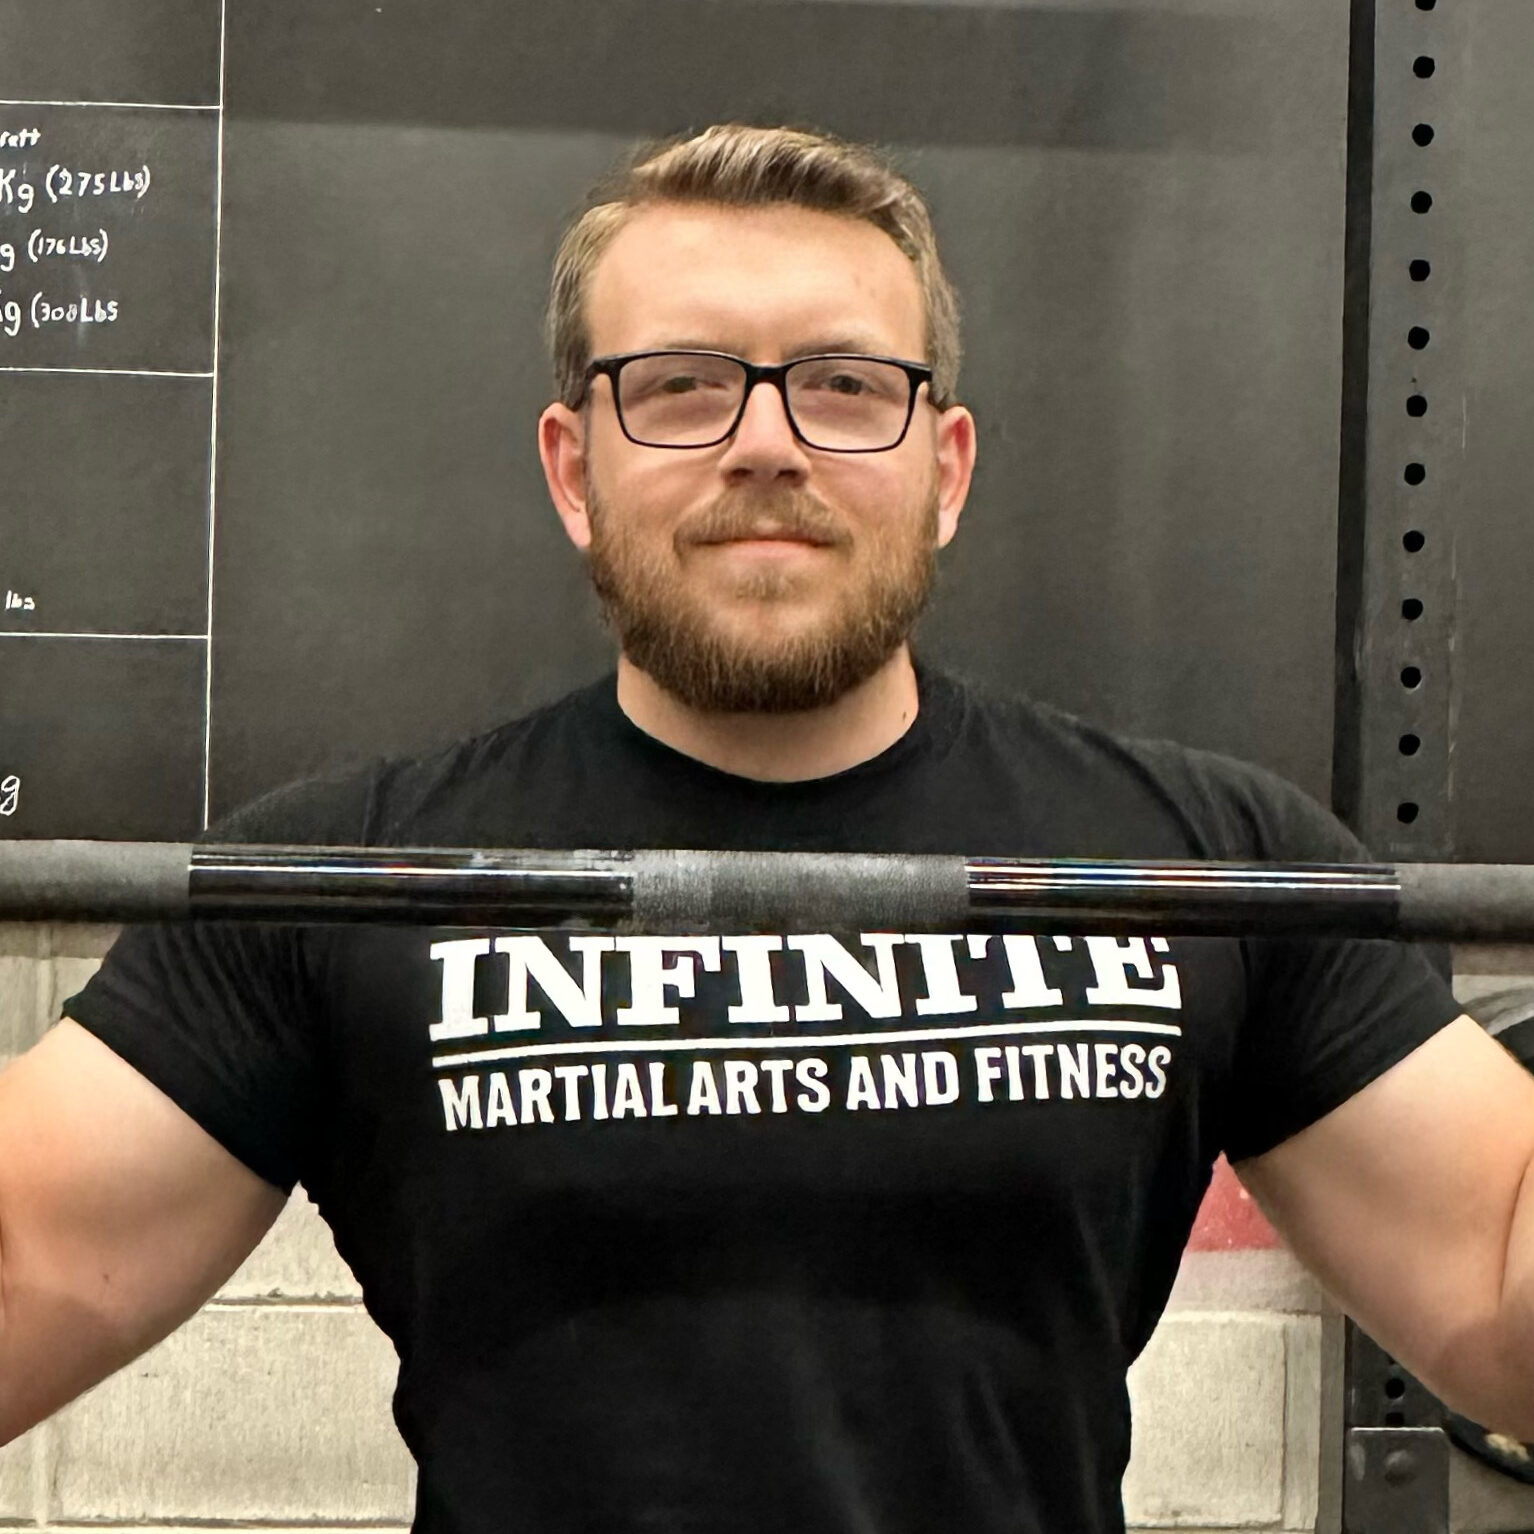 Peter McGuey the head powerlifting coach at Infinite martial art